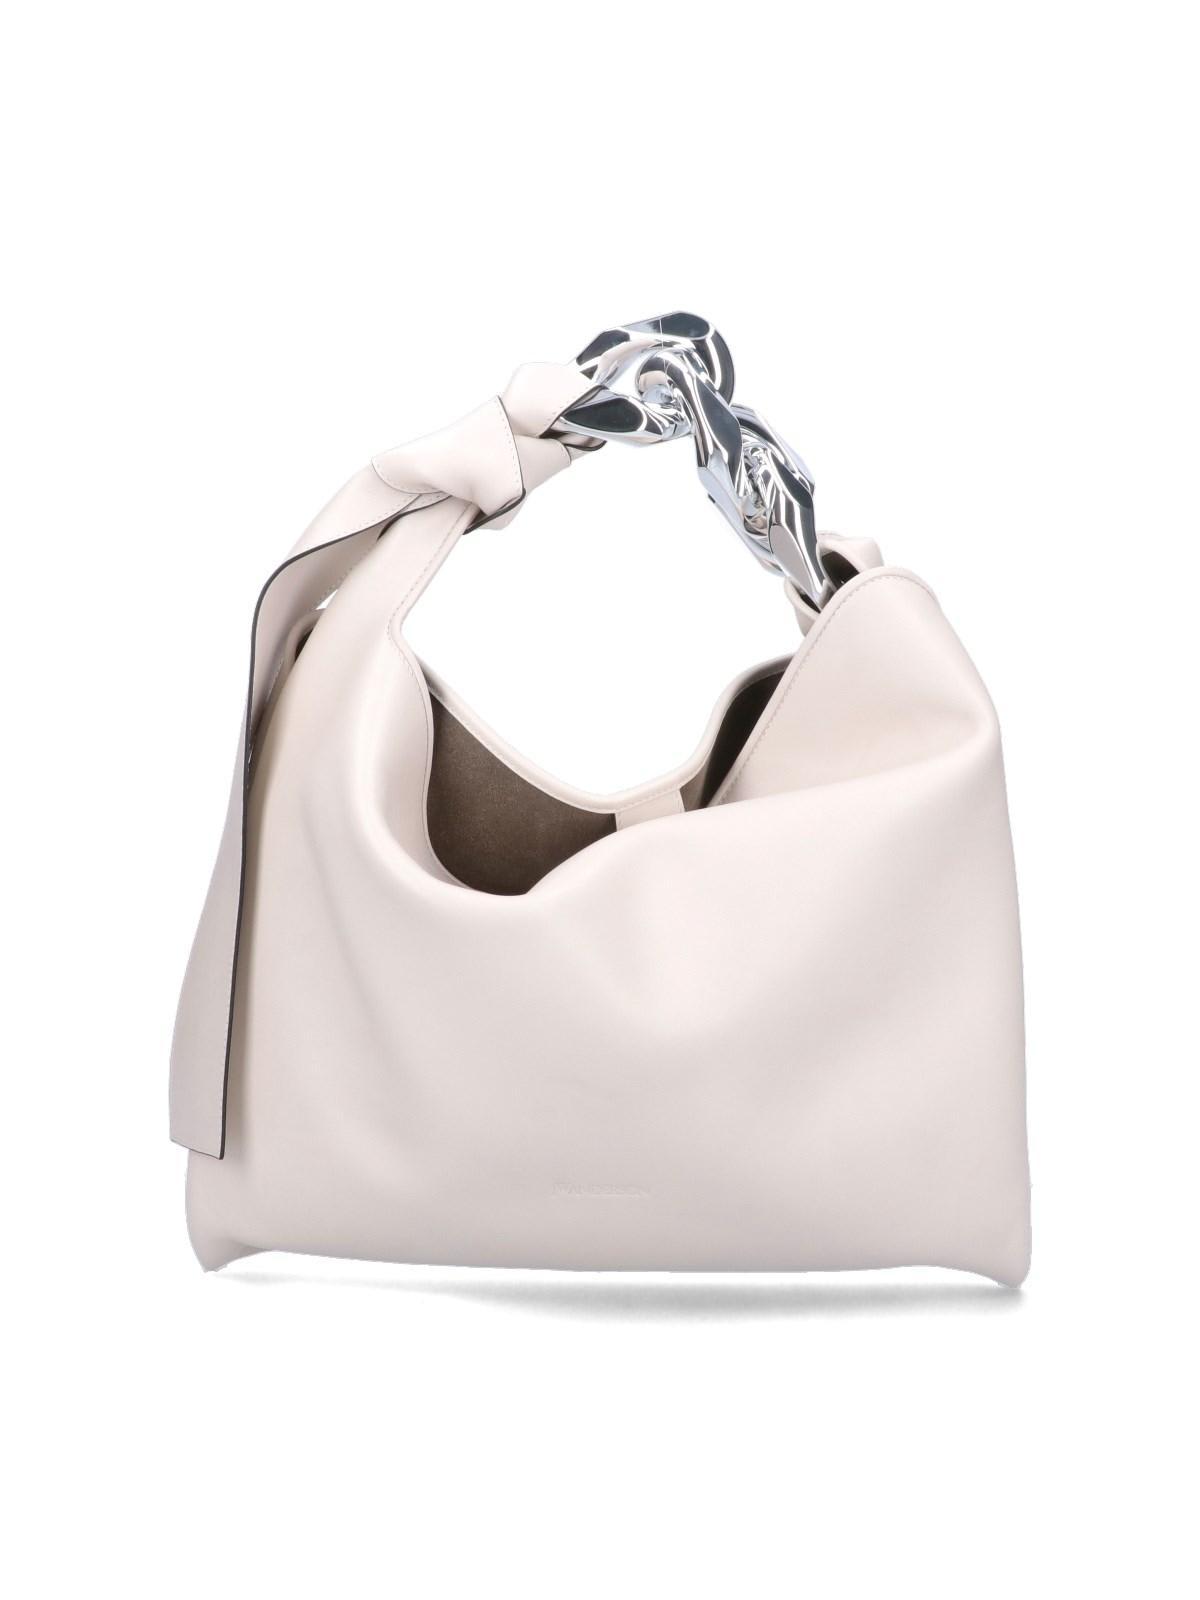 JW Anderson Chain Small Leather Hobo Bag in White